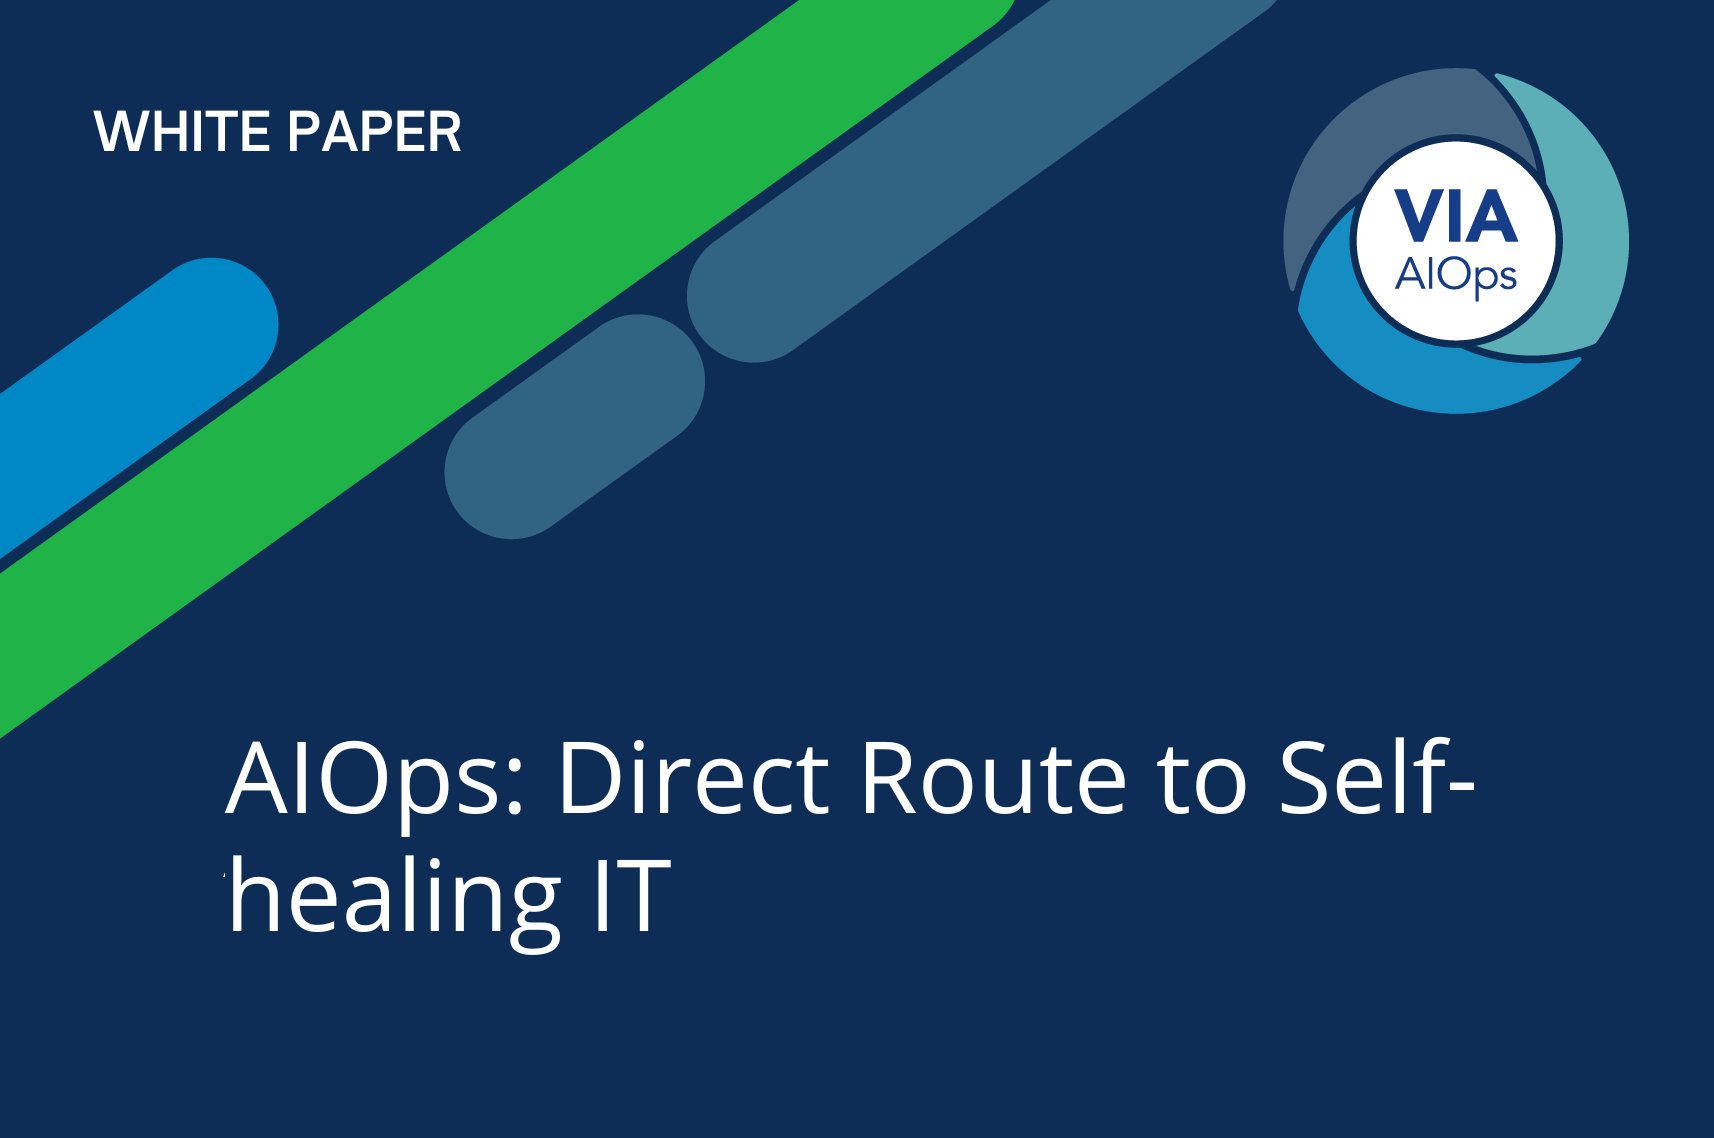 AIOps: Direct Route to Self-healing IT